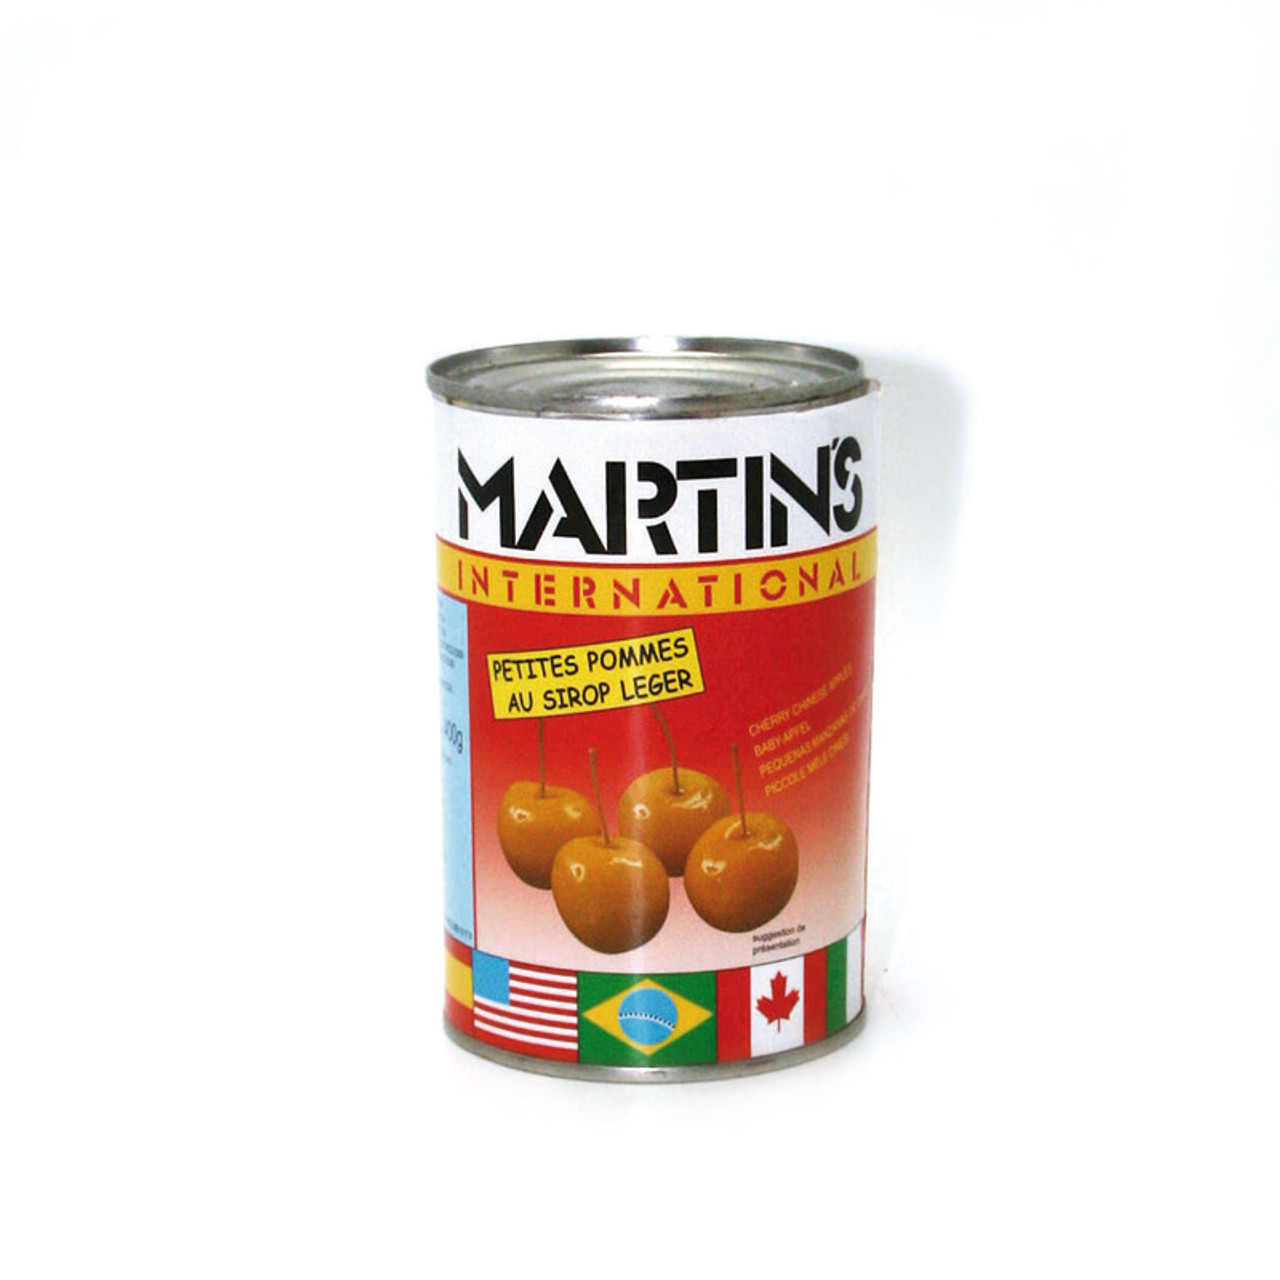 MARTINS - WHOLE BABY APPLES IN LIGHT SYRUP - 400g